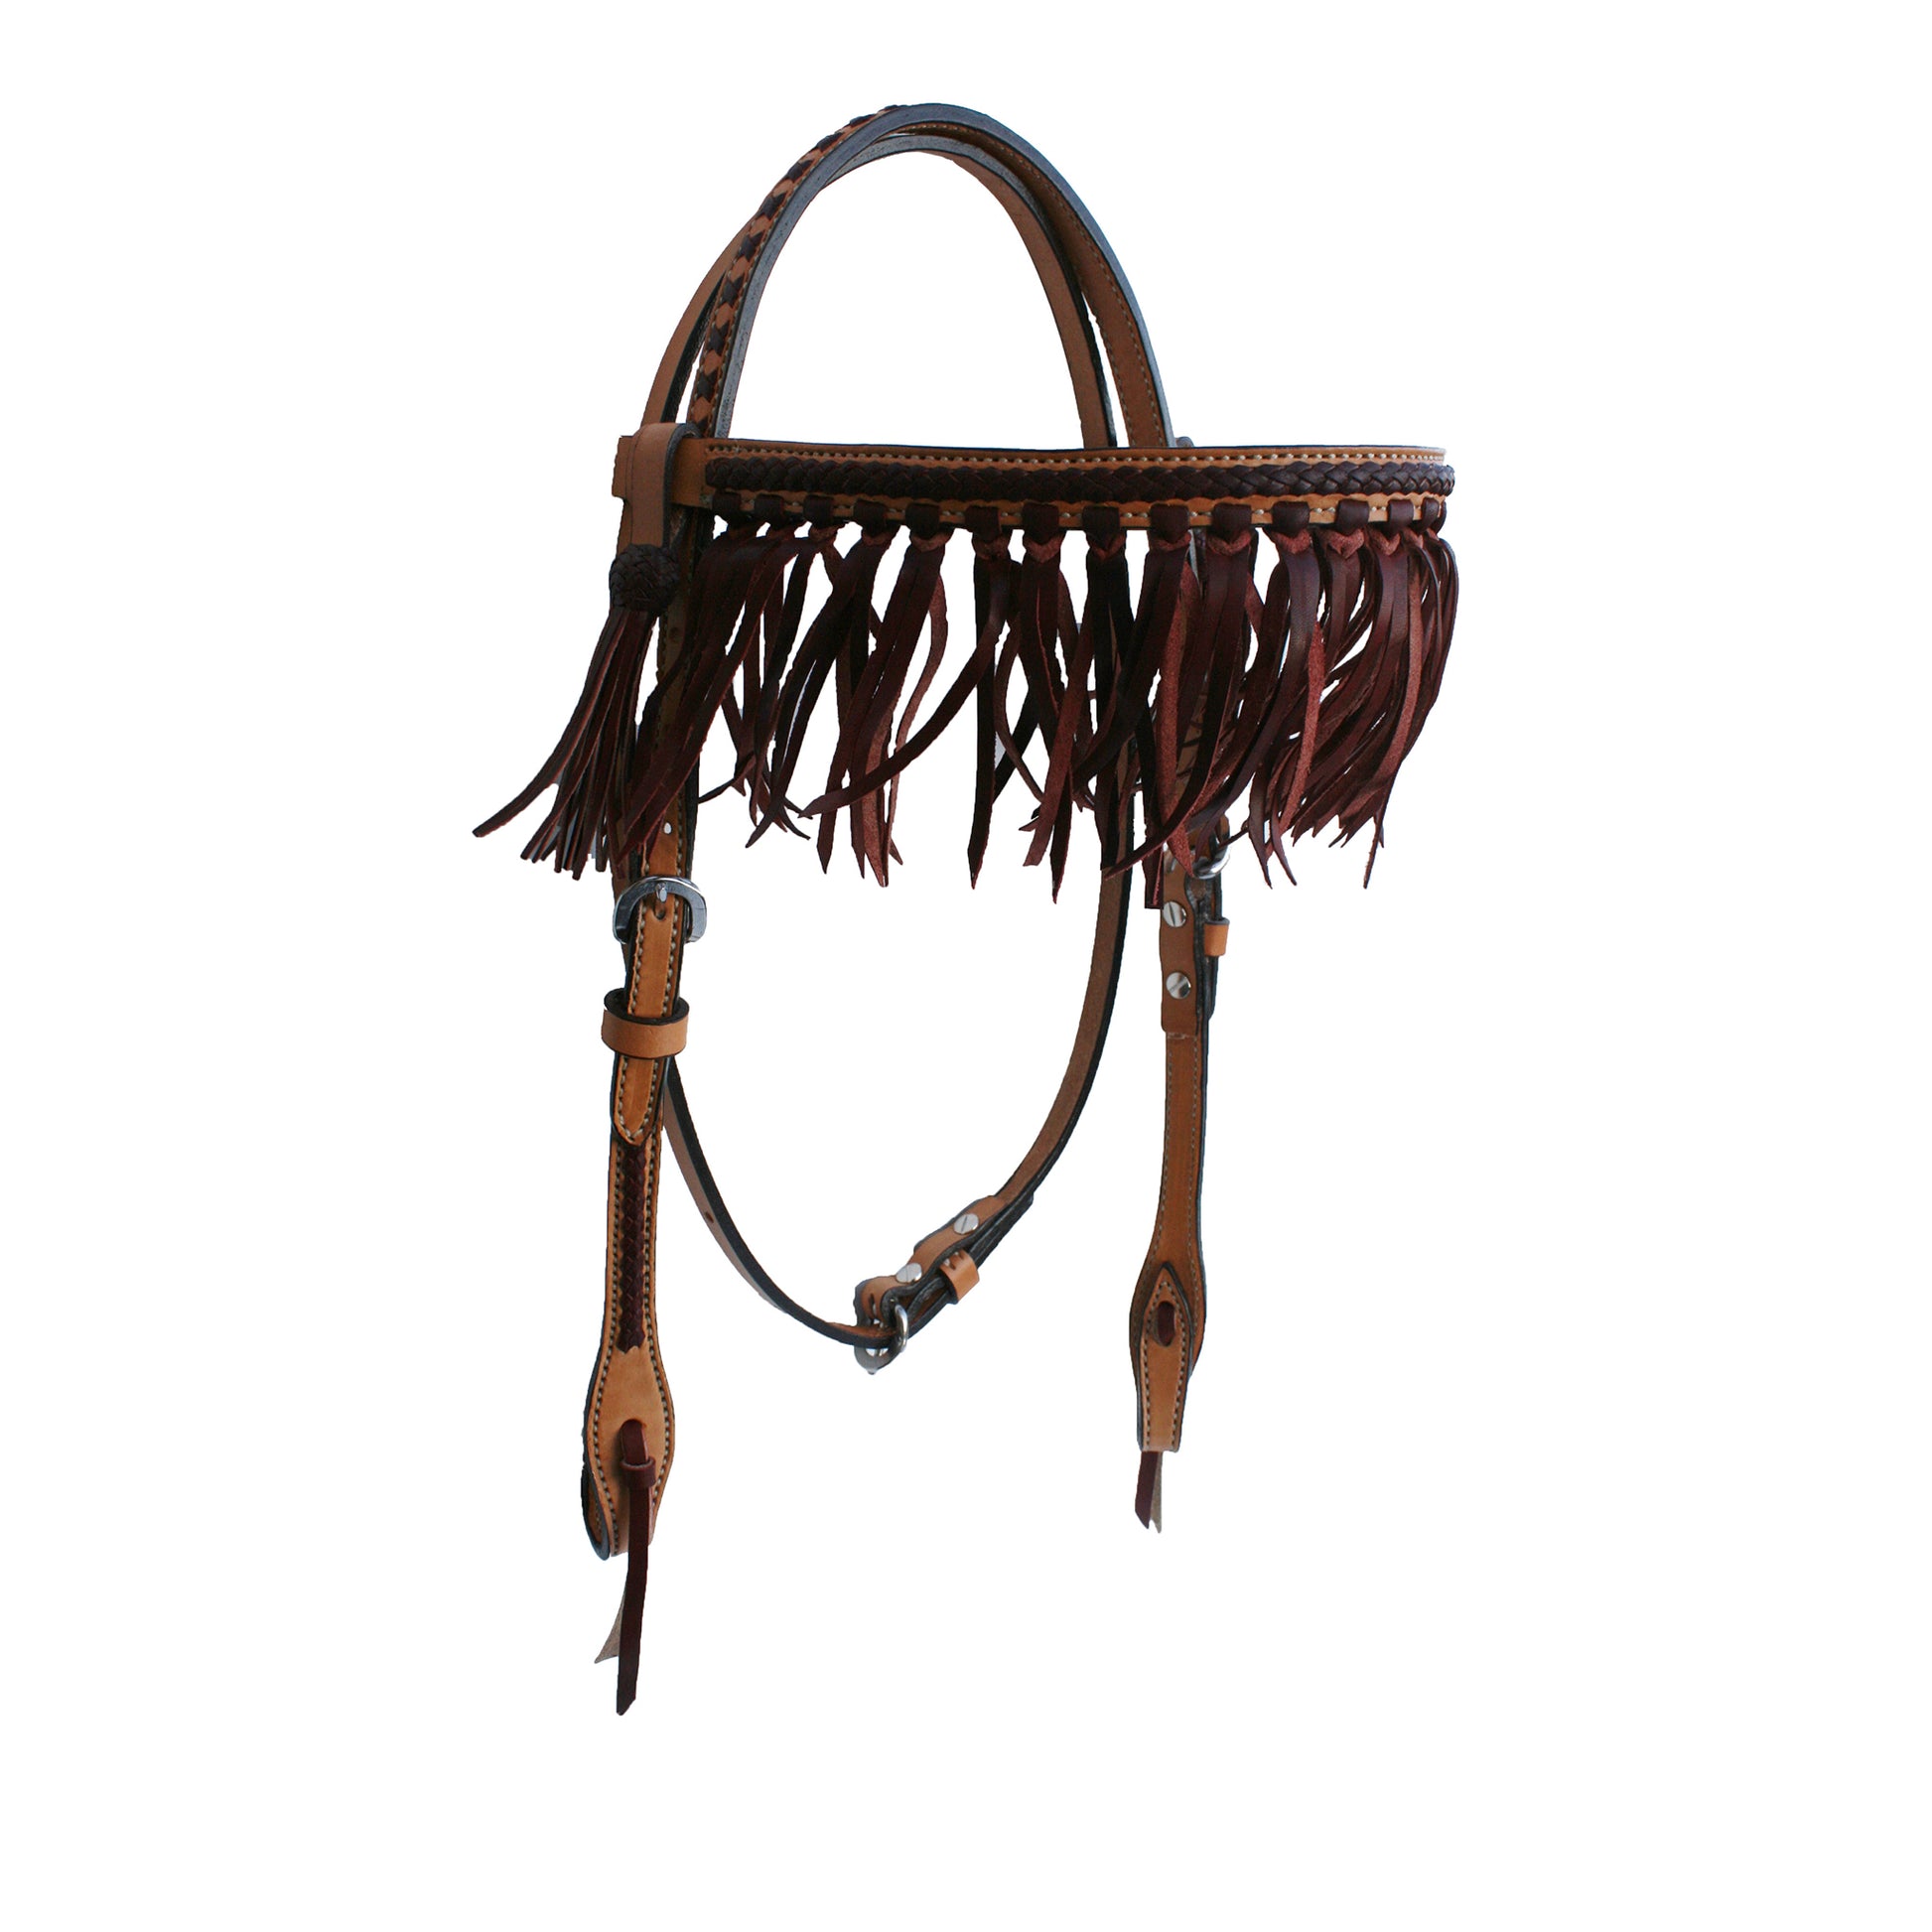 3/4" Straight browband headstall golden leather with latigo braiding, fringe, and tassels.